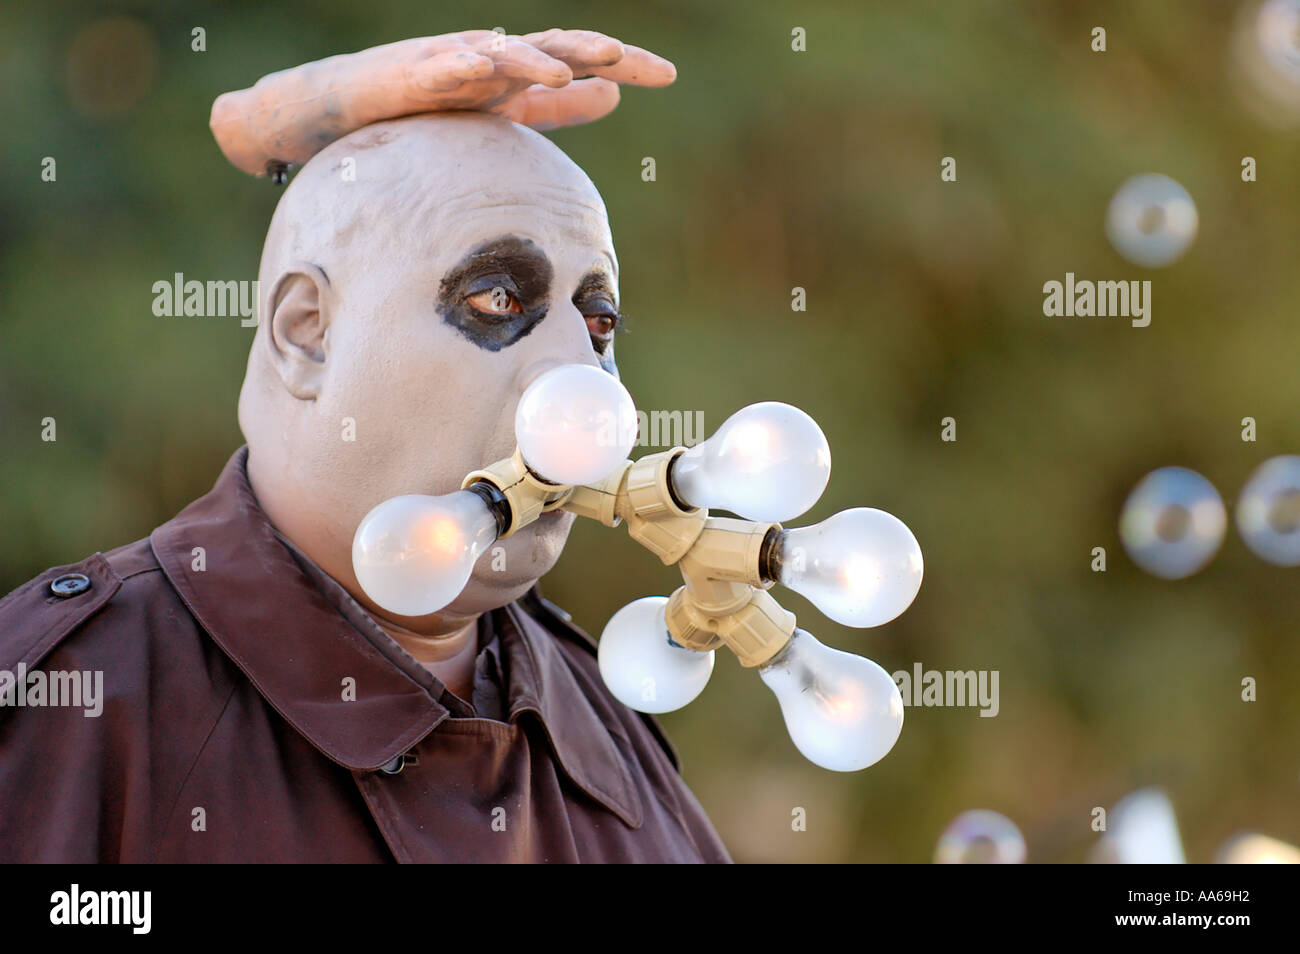 Stock photograph of a man dressed as Uncle Fester from the Addams Family in  the Doo Dah Parade Pasadena California USA Stock Photo - Alamy